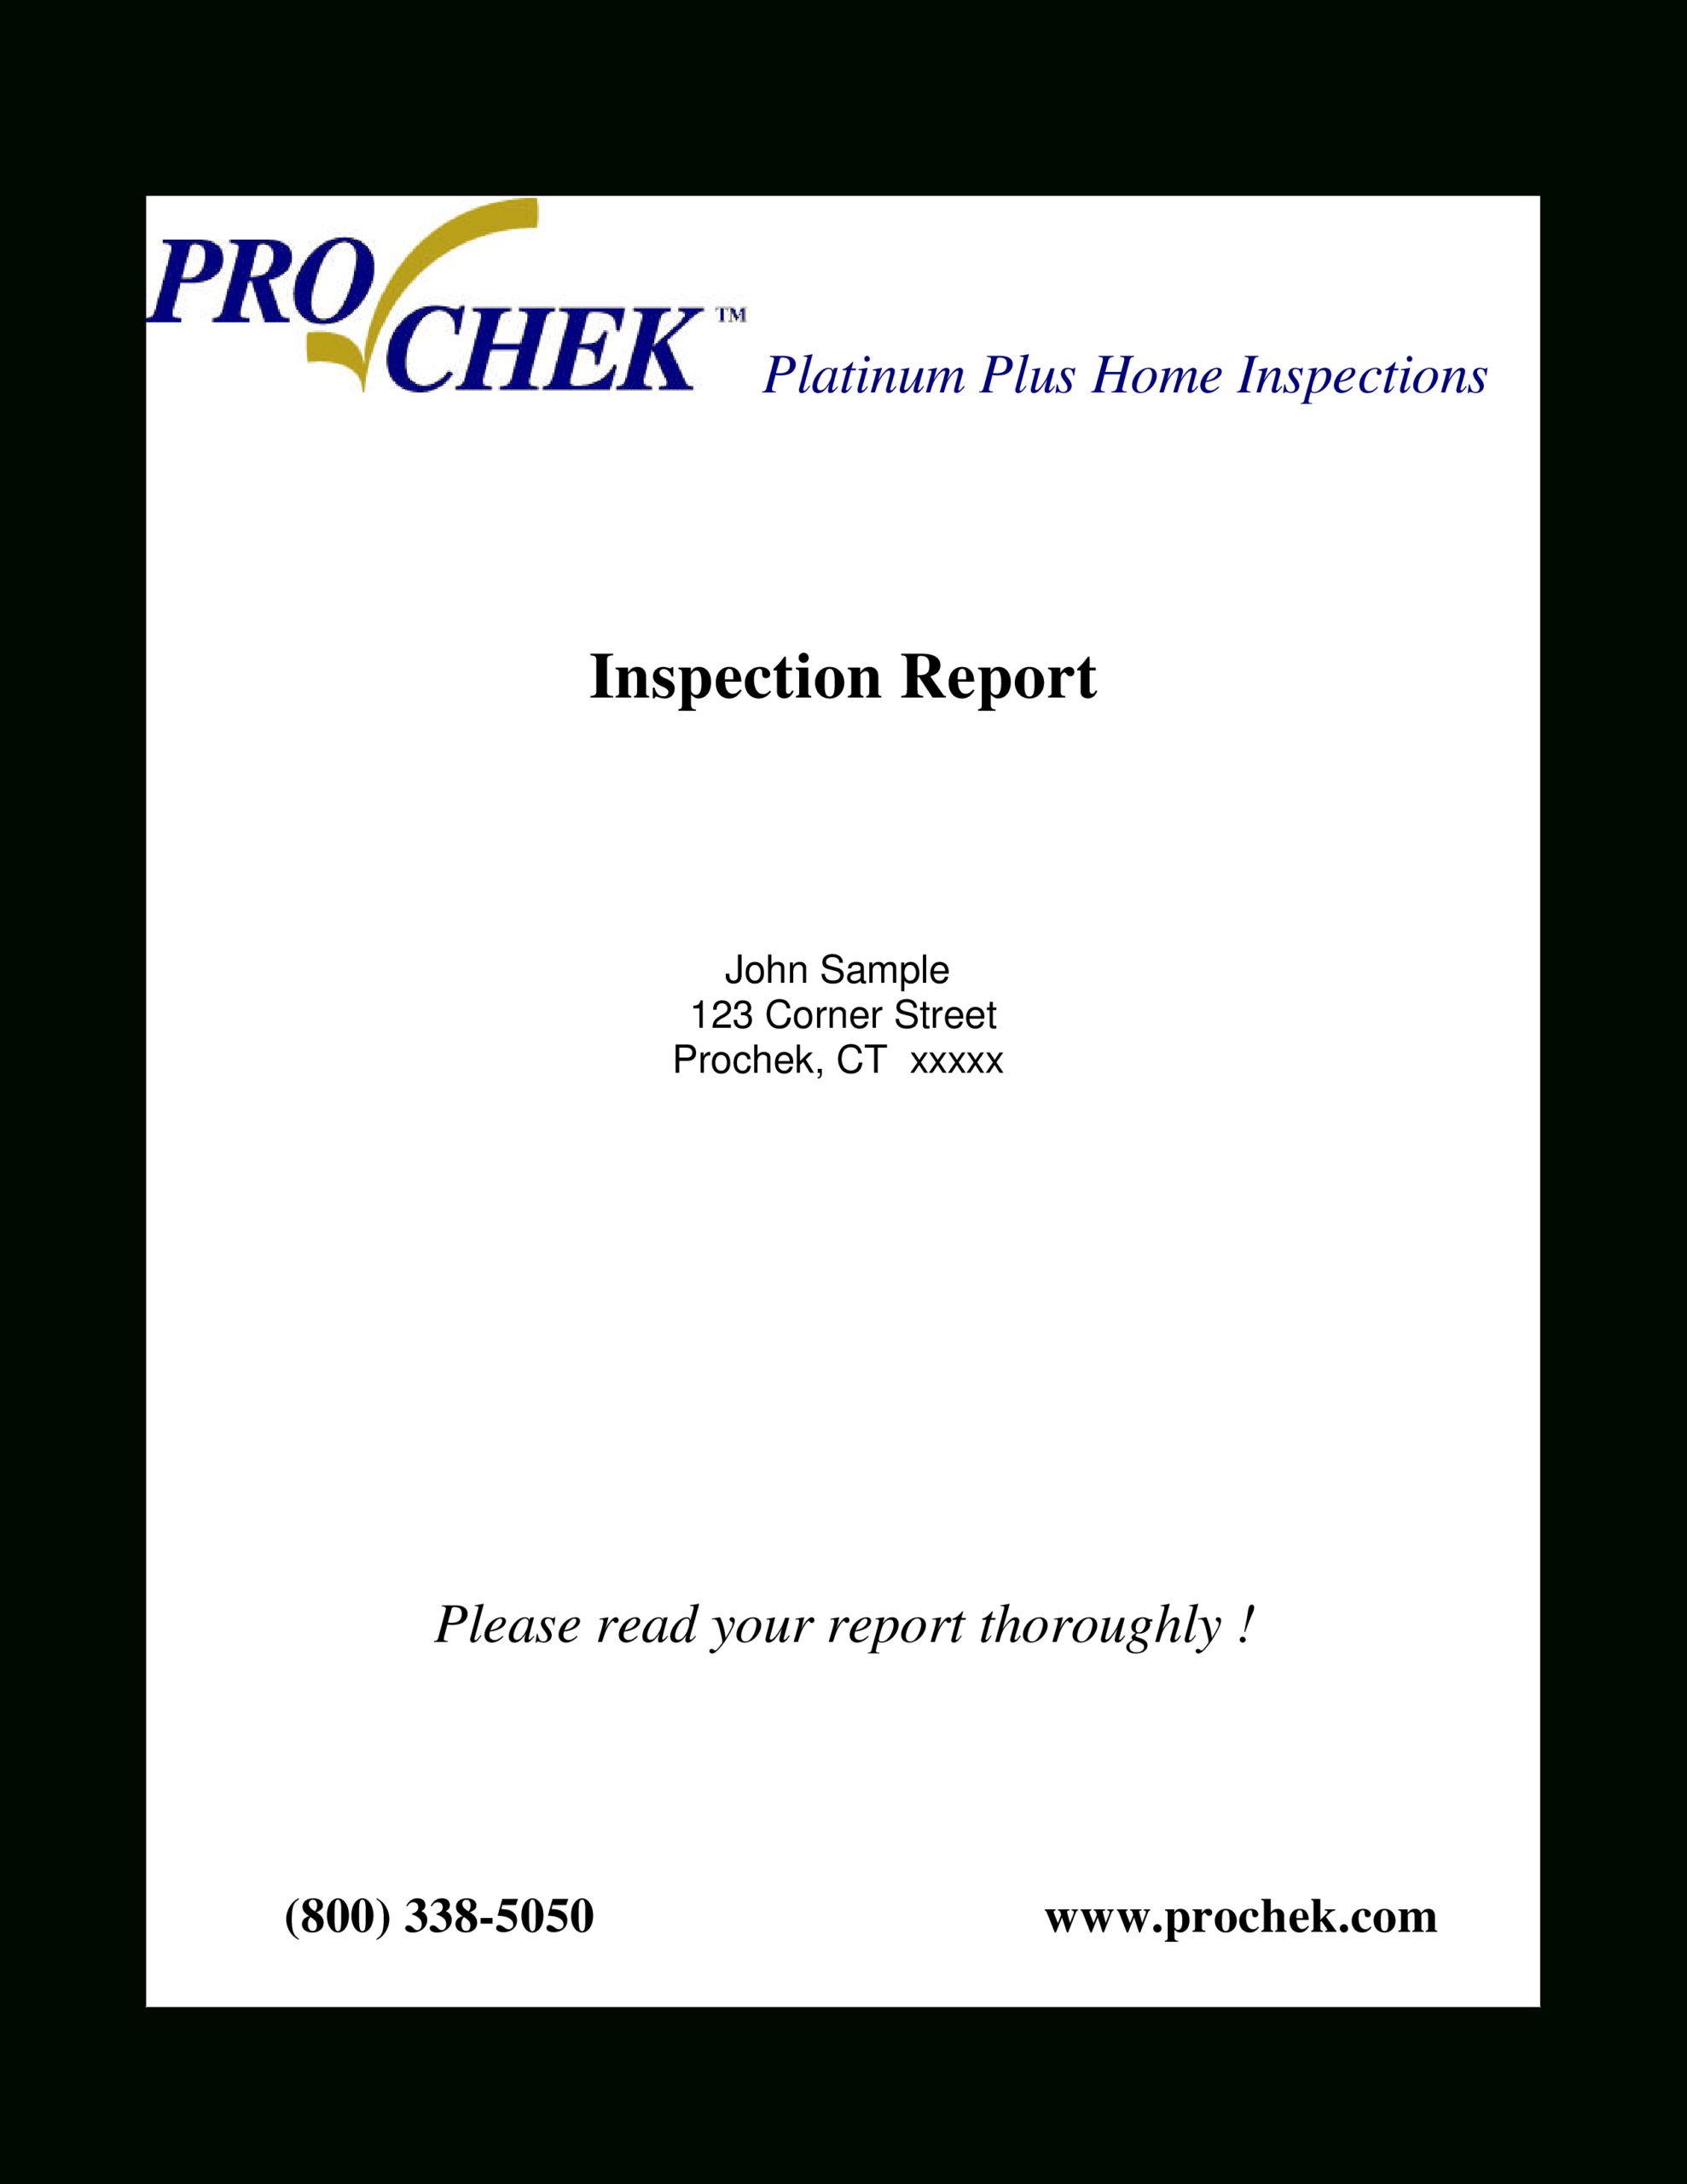 Home Inspection Report | Templates At Allbusinesstemplates In Home Inspection Report Template